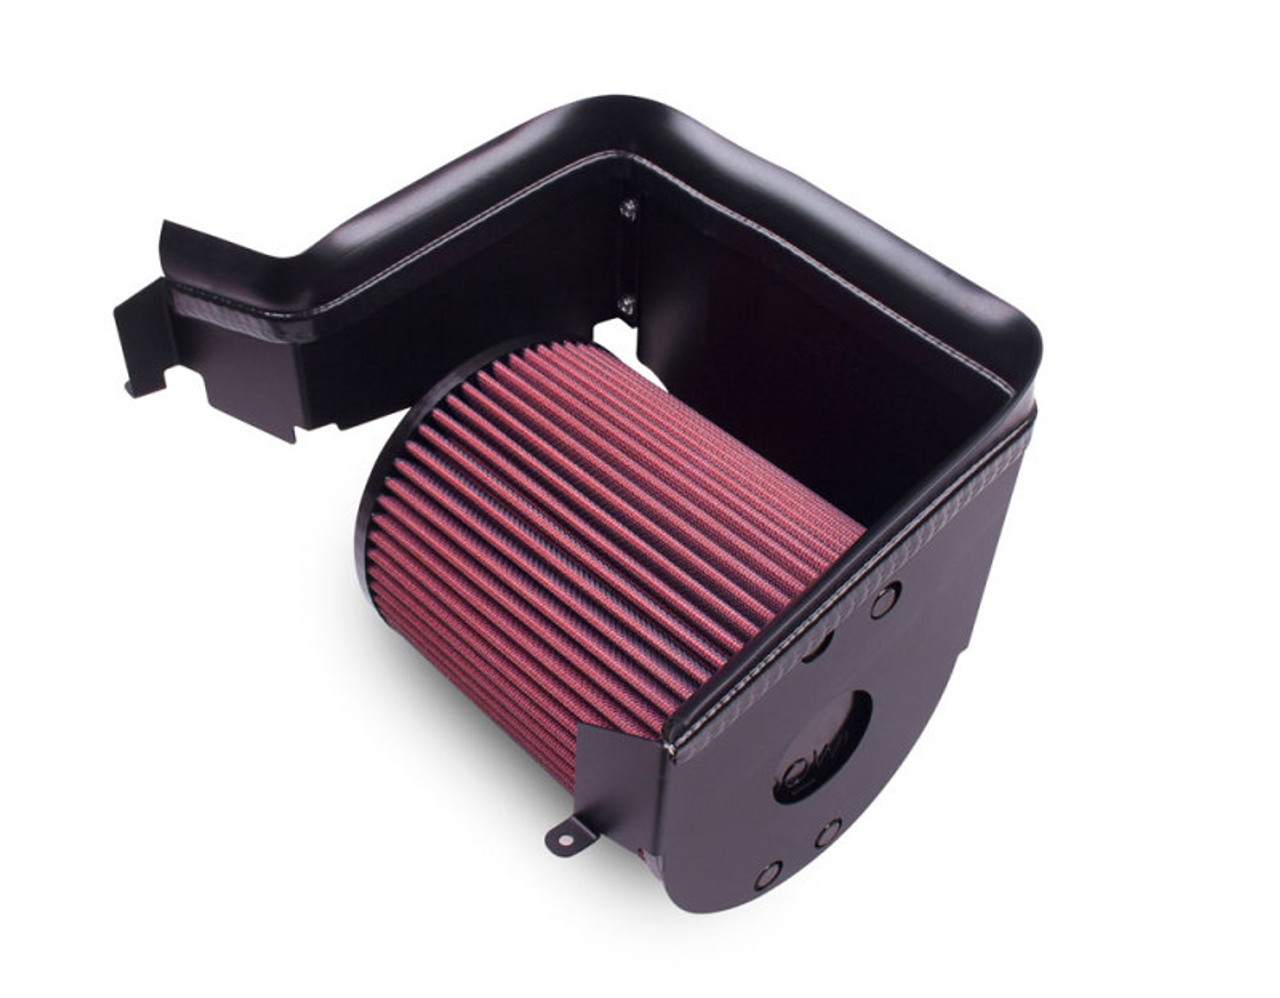 Airaid Cold Air Intake System: Increased Horsepower, Superior Filtration: C 